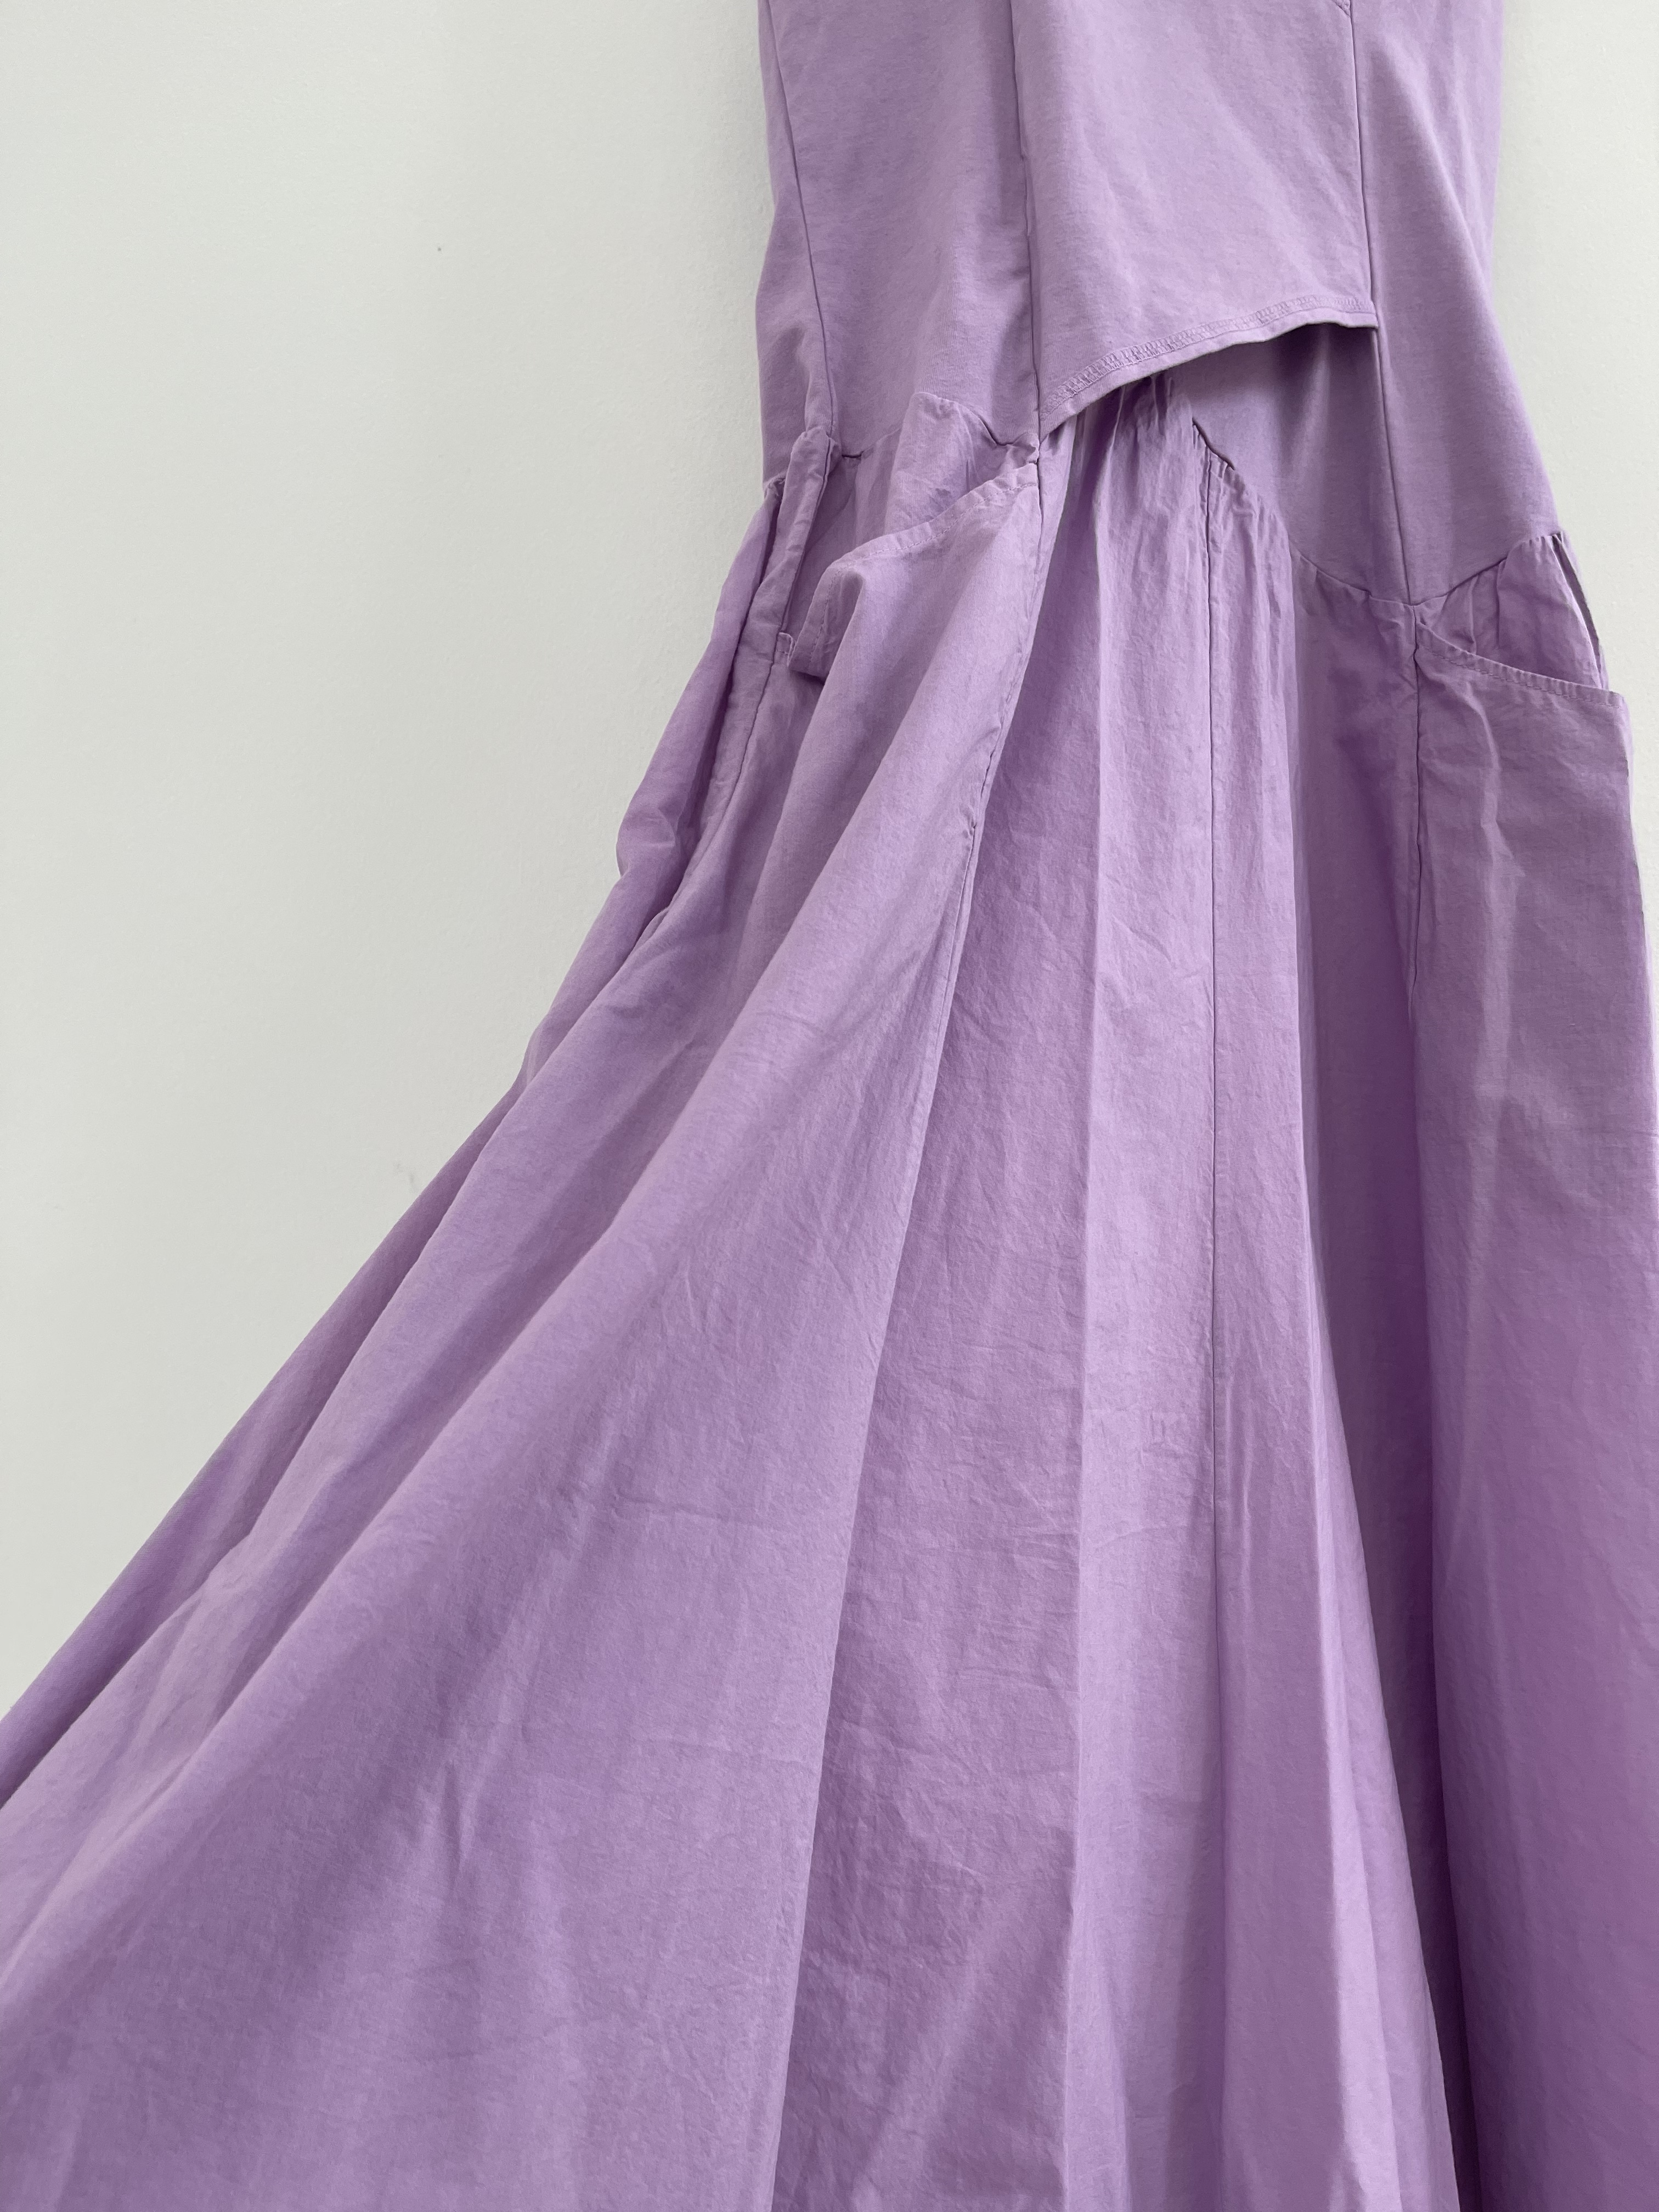 Luna Luz: Cross Over Bodice Long Dress (Ships Immed in NEW  Color: Orchid!)